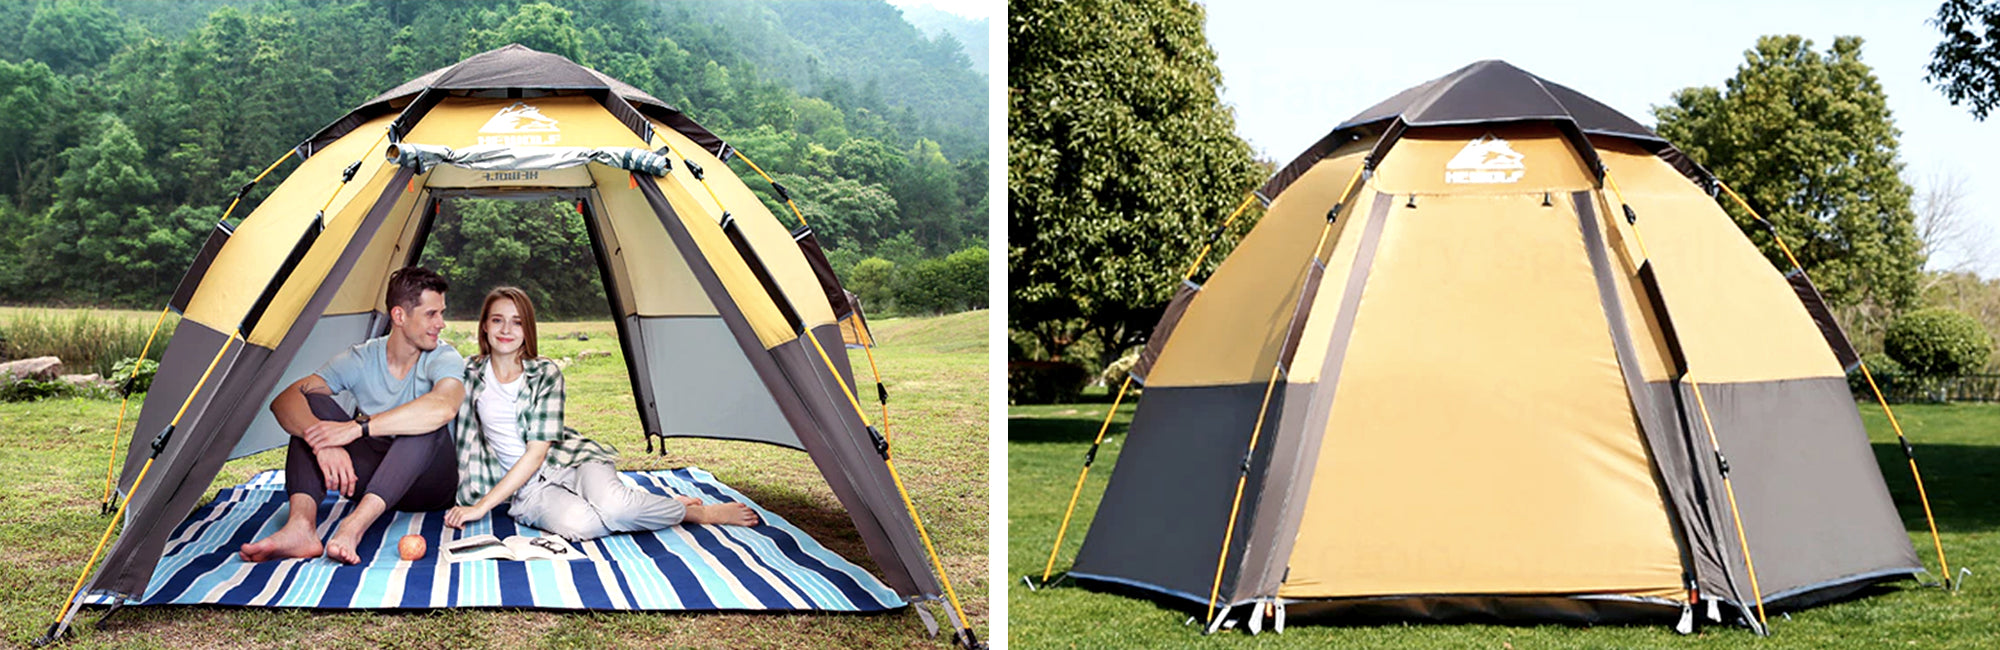 Camping Tents 4 Person Easy Pop Up 4 Seasons Tents for Family